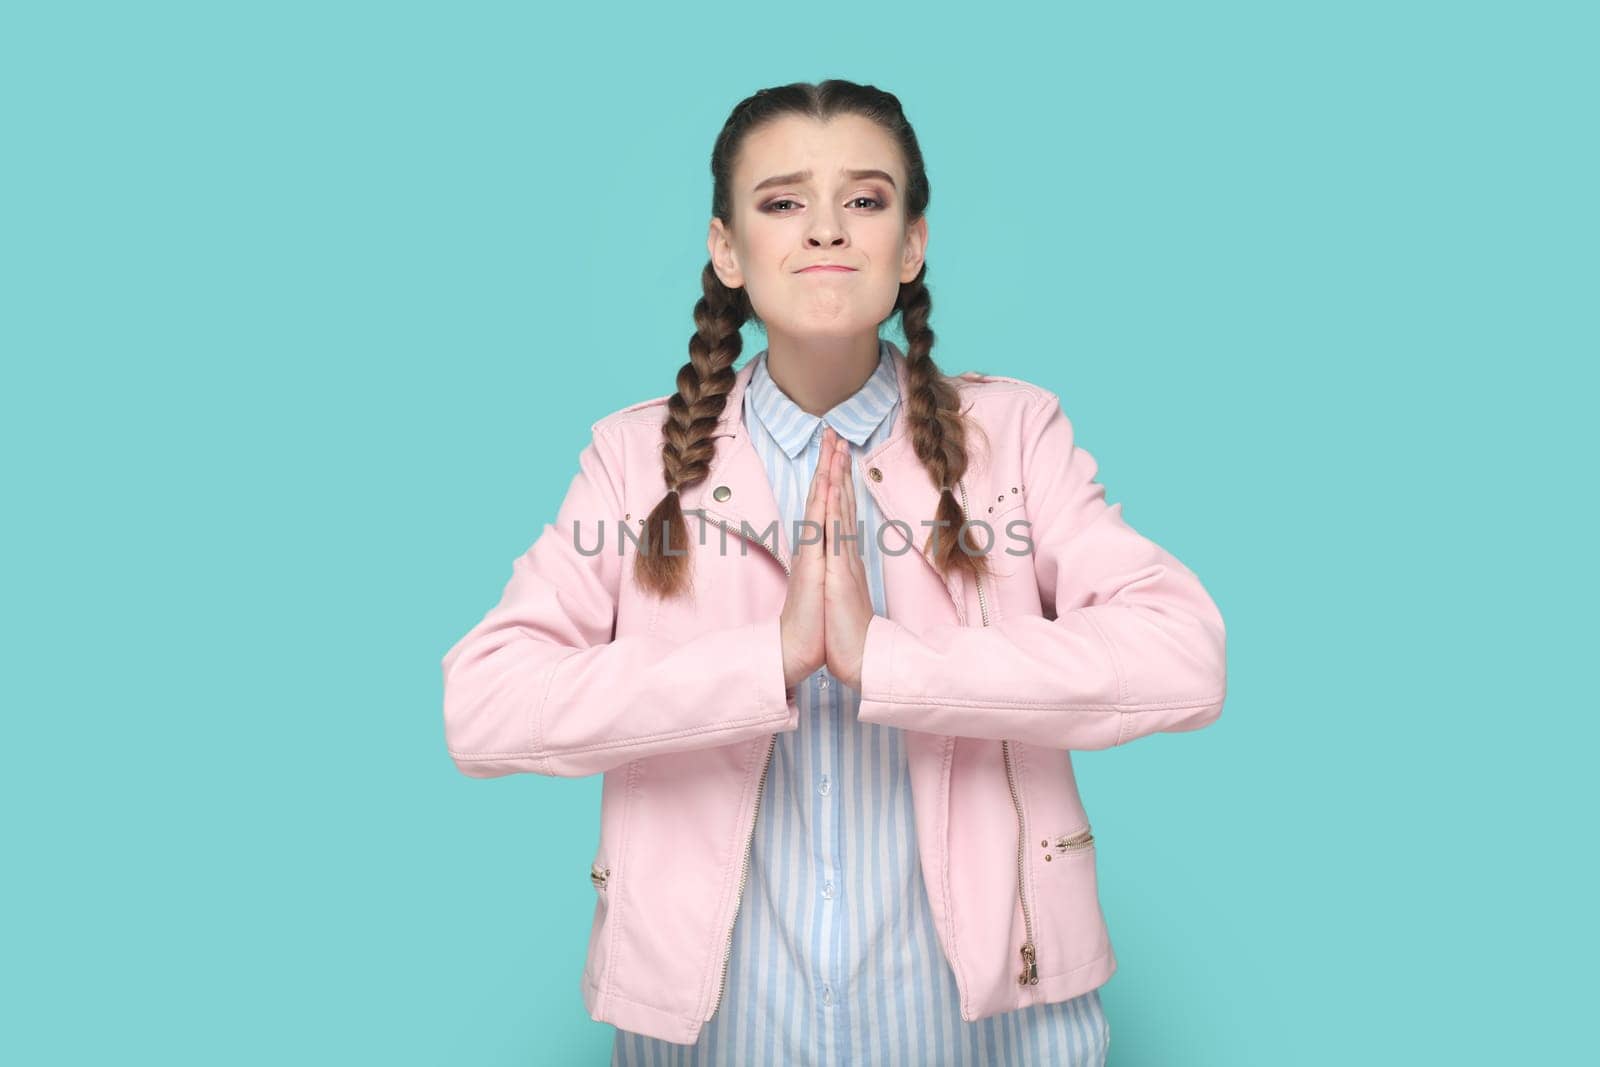 Portrait of hopeful teenager girl with braids wearing pink jacket standing keeps hand in praying gesture, pleading, asking to forgive. Indoor studio shot isolated on green background.